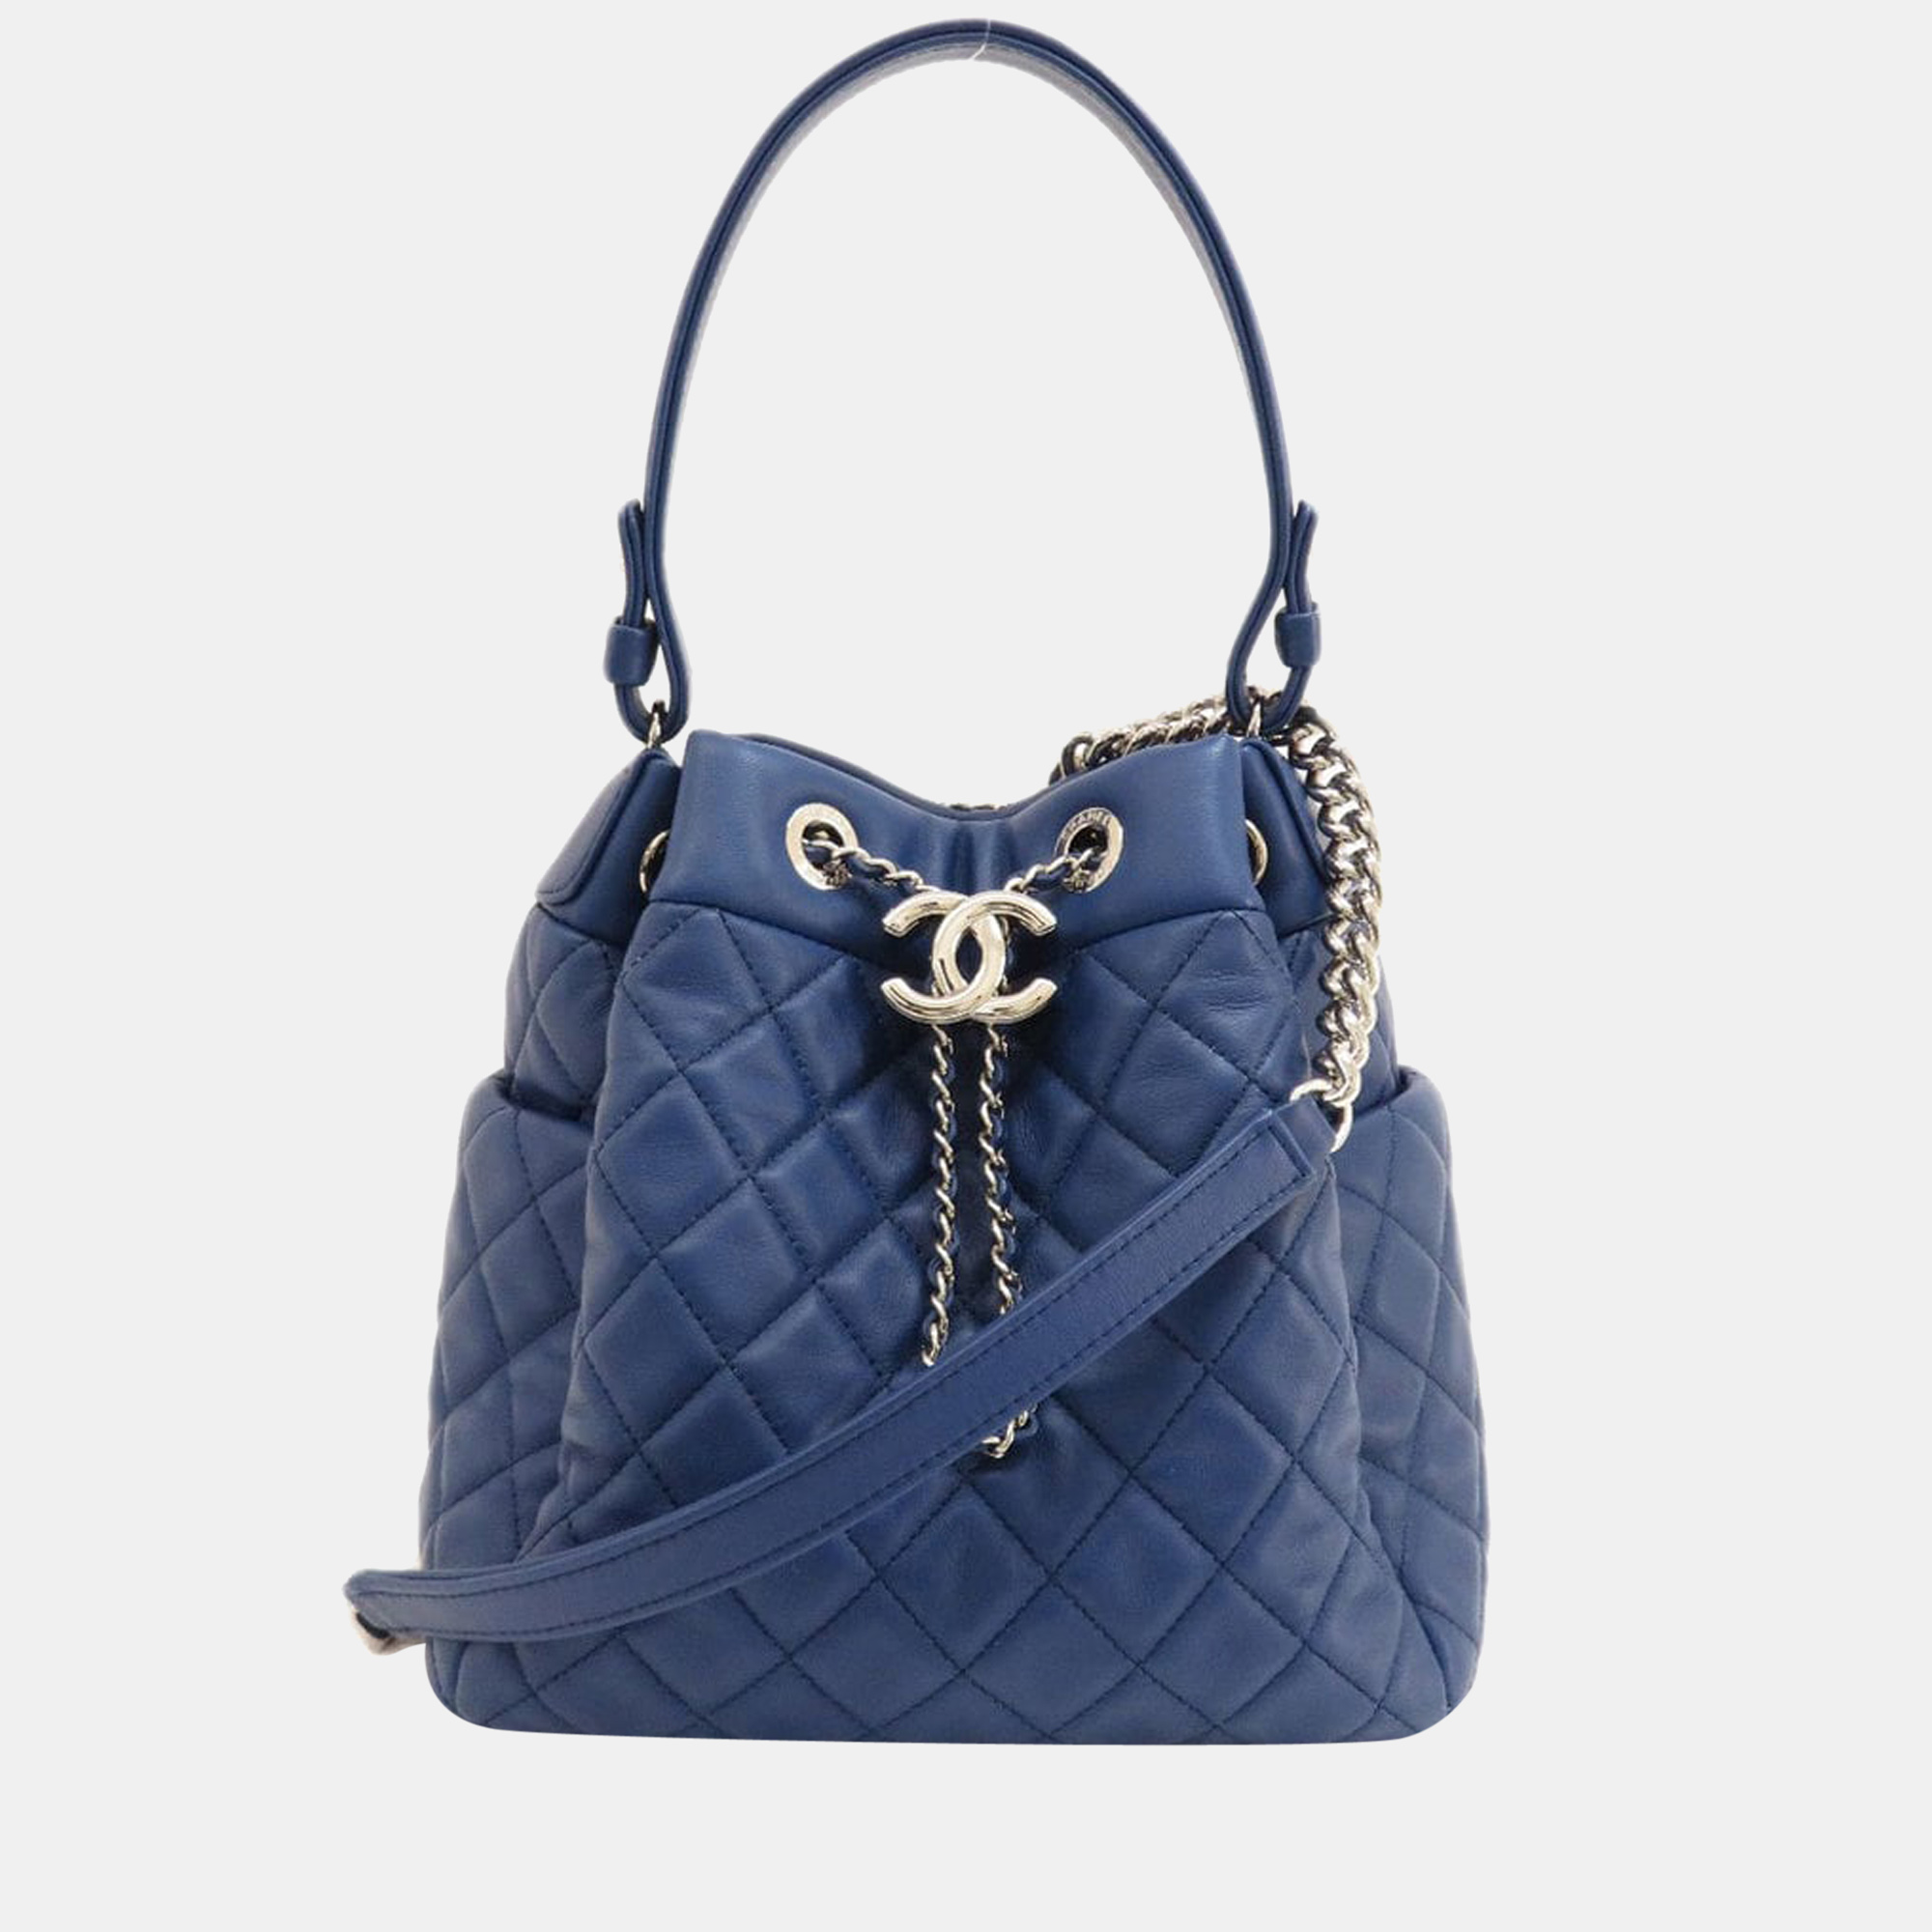 Pre-owned Chanel Blue Lambskin Leather Drawstring Cc Bucket Bag